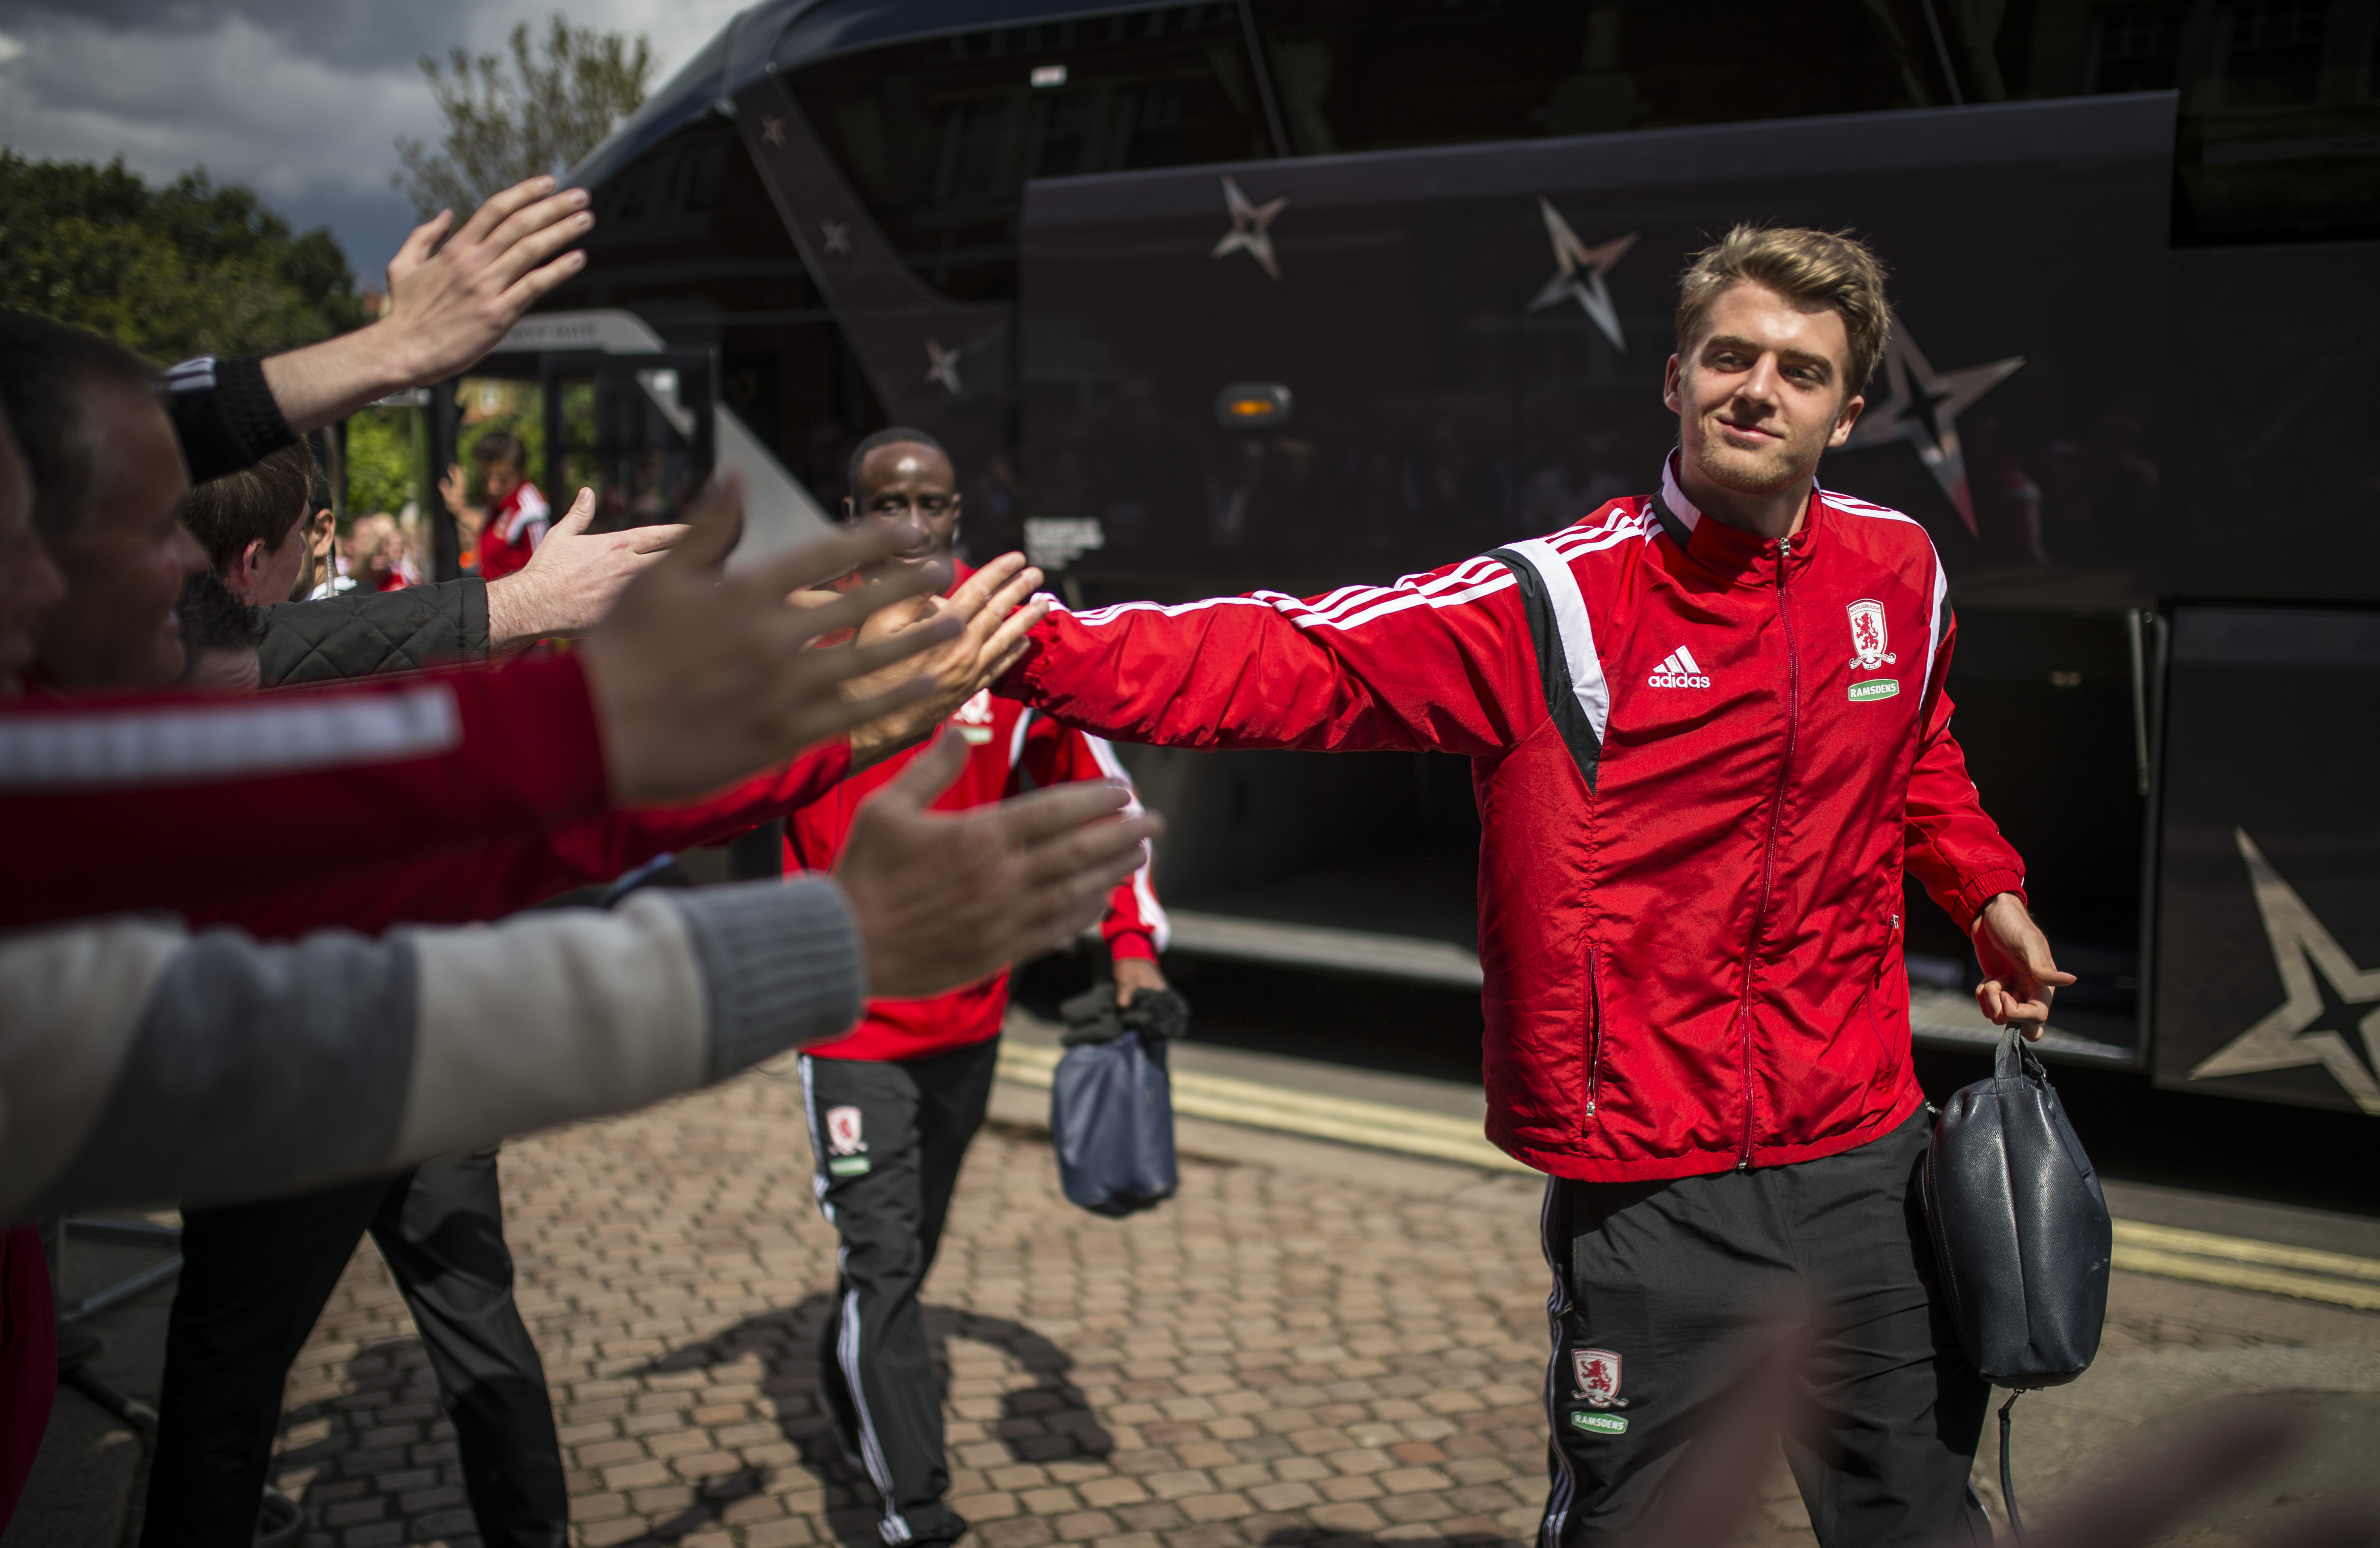 LONDON, ENGLAND - APRIL 25:  Patrick Bamford of Middlesbrough FC arrives ahead of the Sky Bet Championship match between Fulham and Middlesbrough at Craven Cottage on April 25, 2015 in London, England.  (Photo by Justin Setterfield/Getty Images)